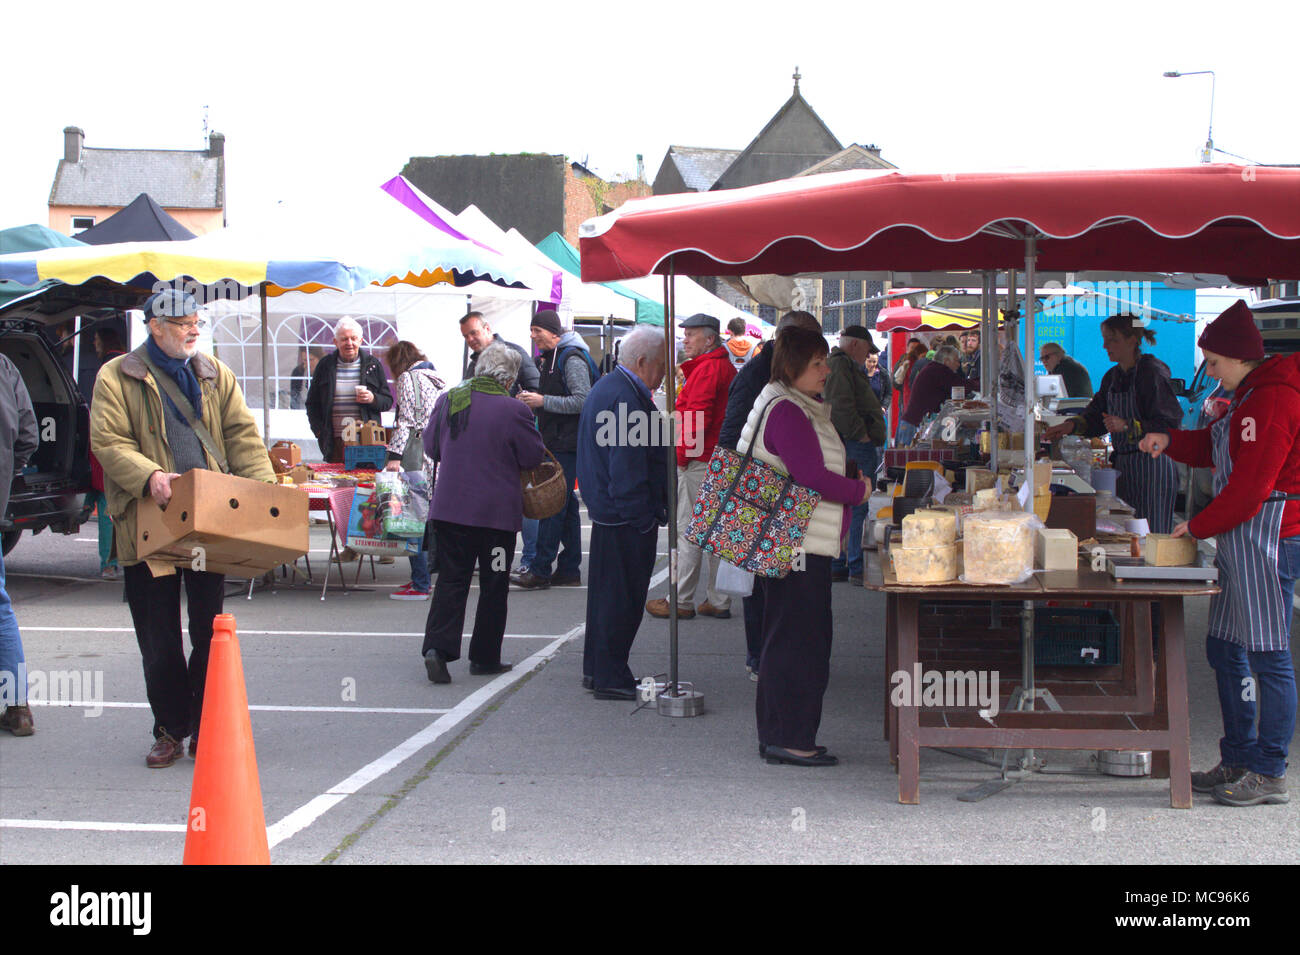 a weekly country food market full food stalls and full of people shopping and bargain hunting in skibbereen, ireland,a popular holiday town. Stock Photo